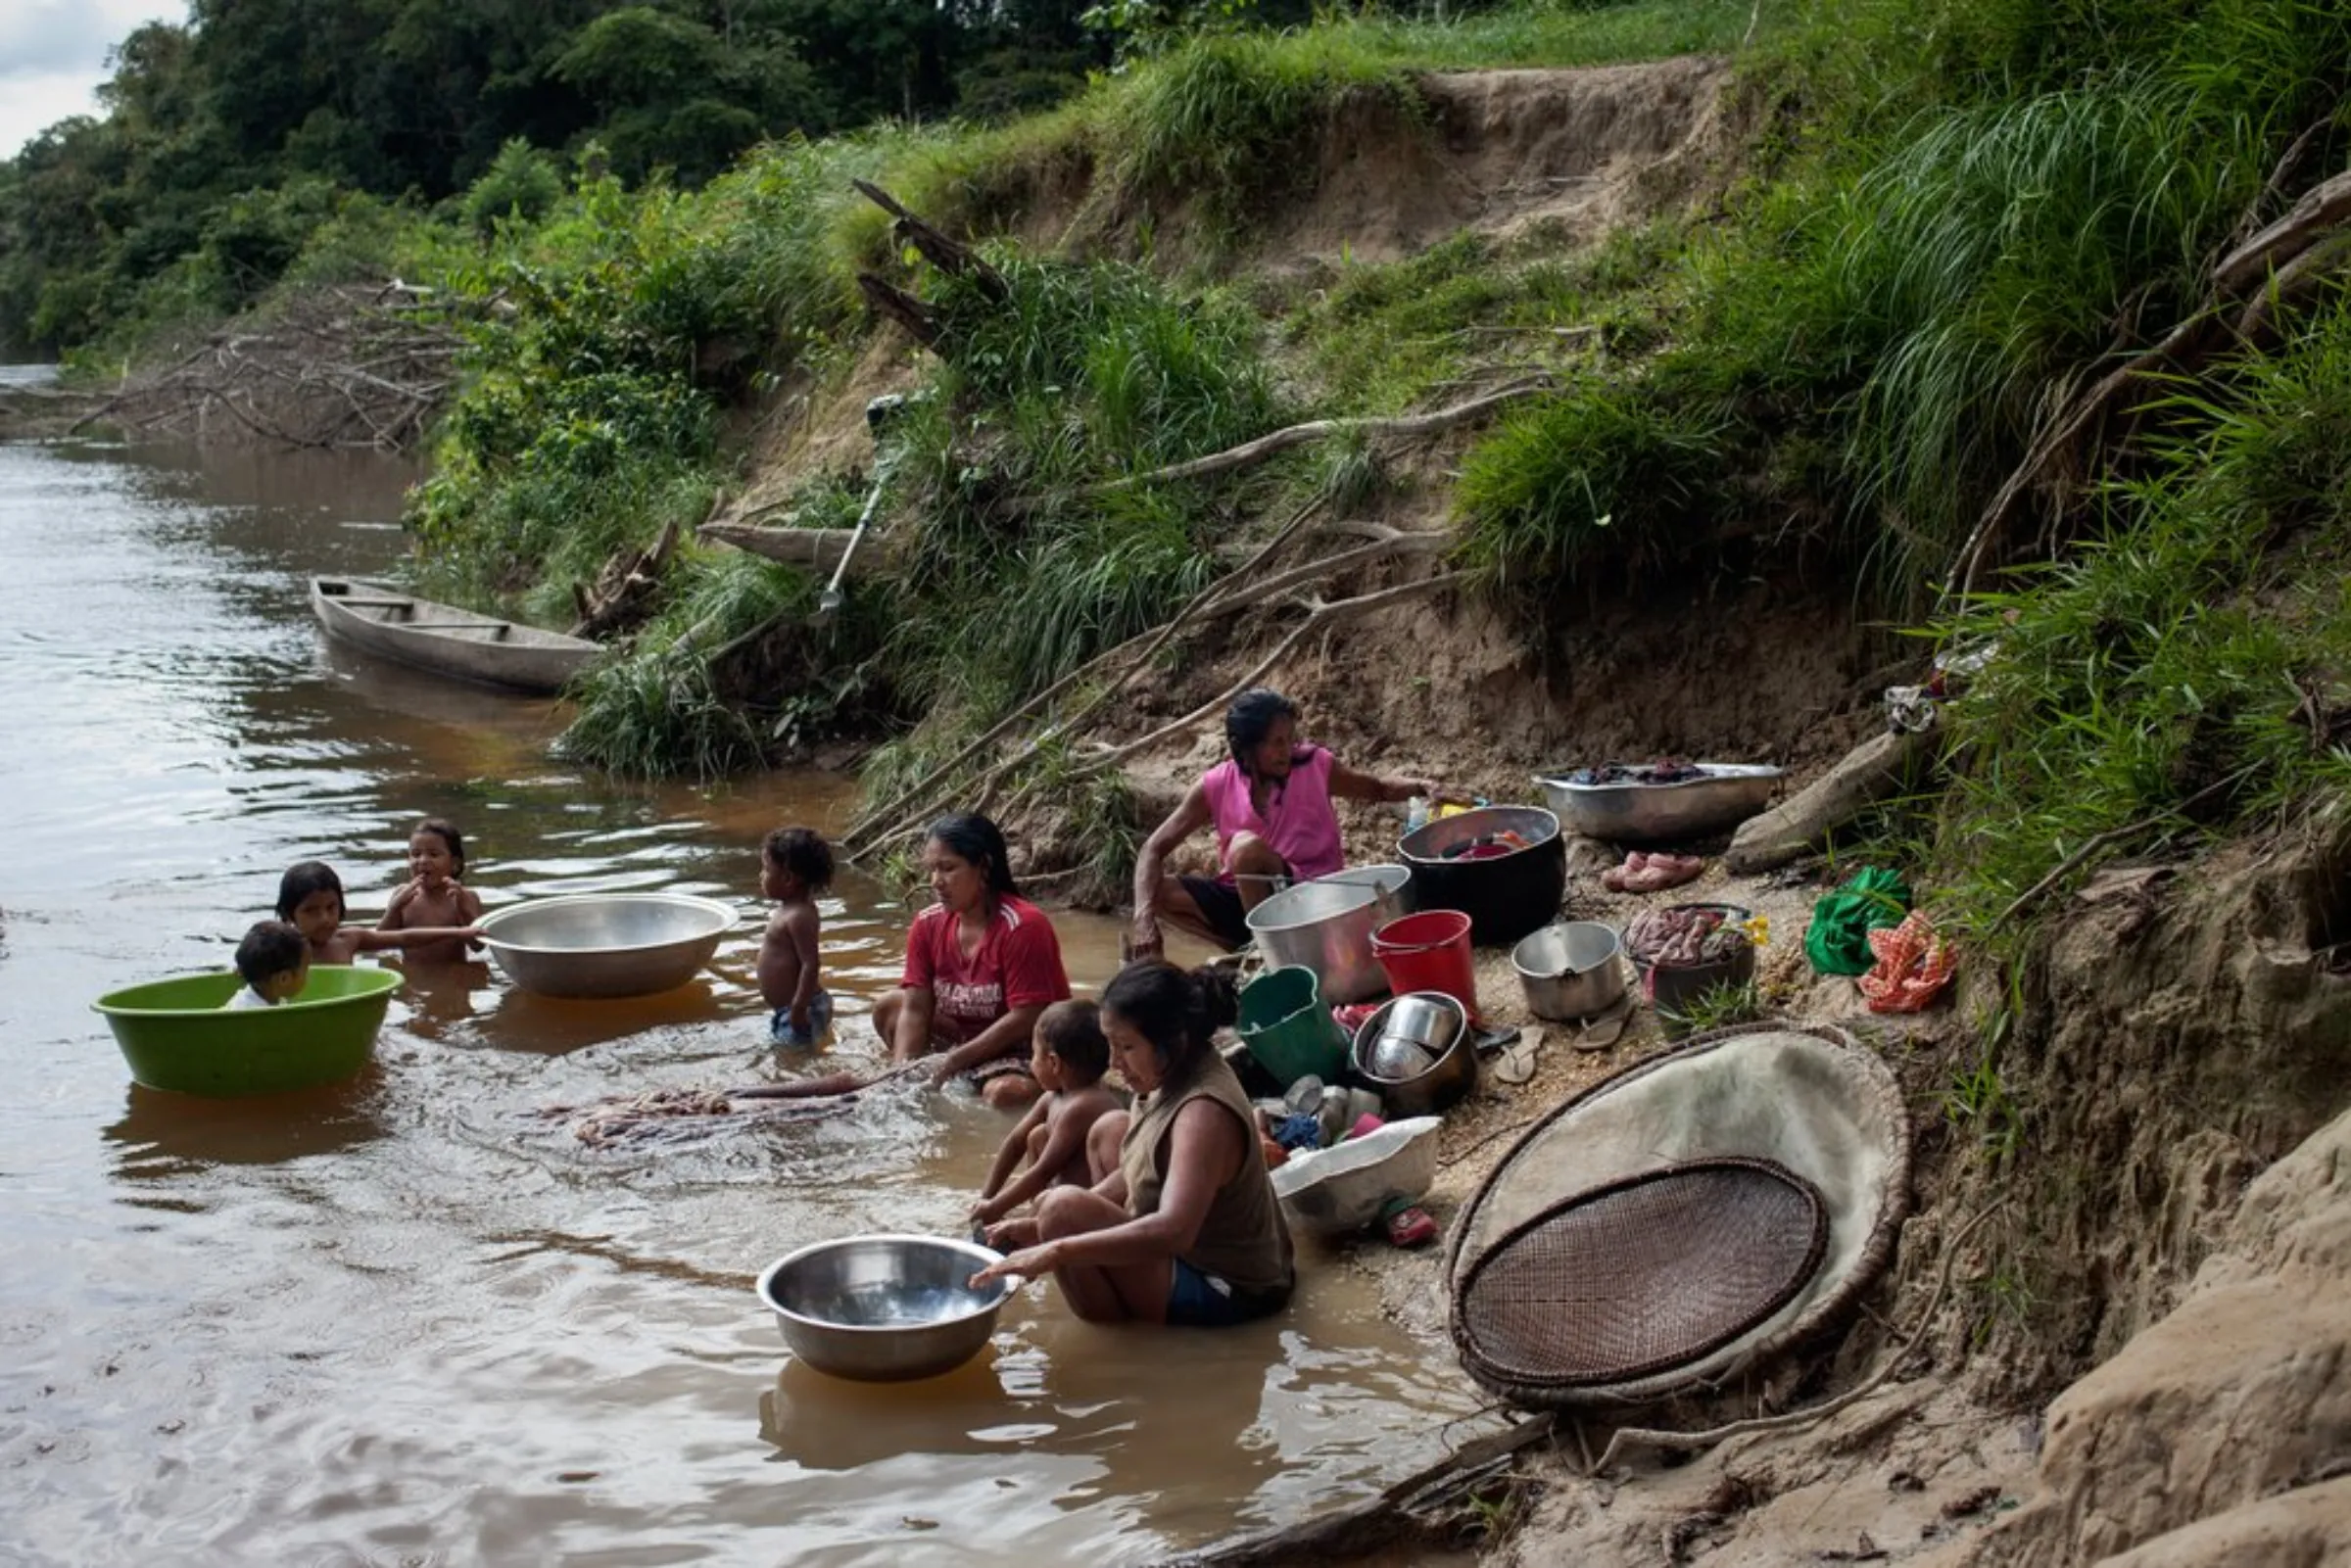 Women of the Puerto Libre community wash pots, pans and clothes in the Miriti-Parana River in Colombia’s southeast Amazonas province, December 16, 2021